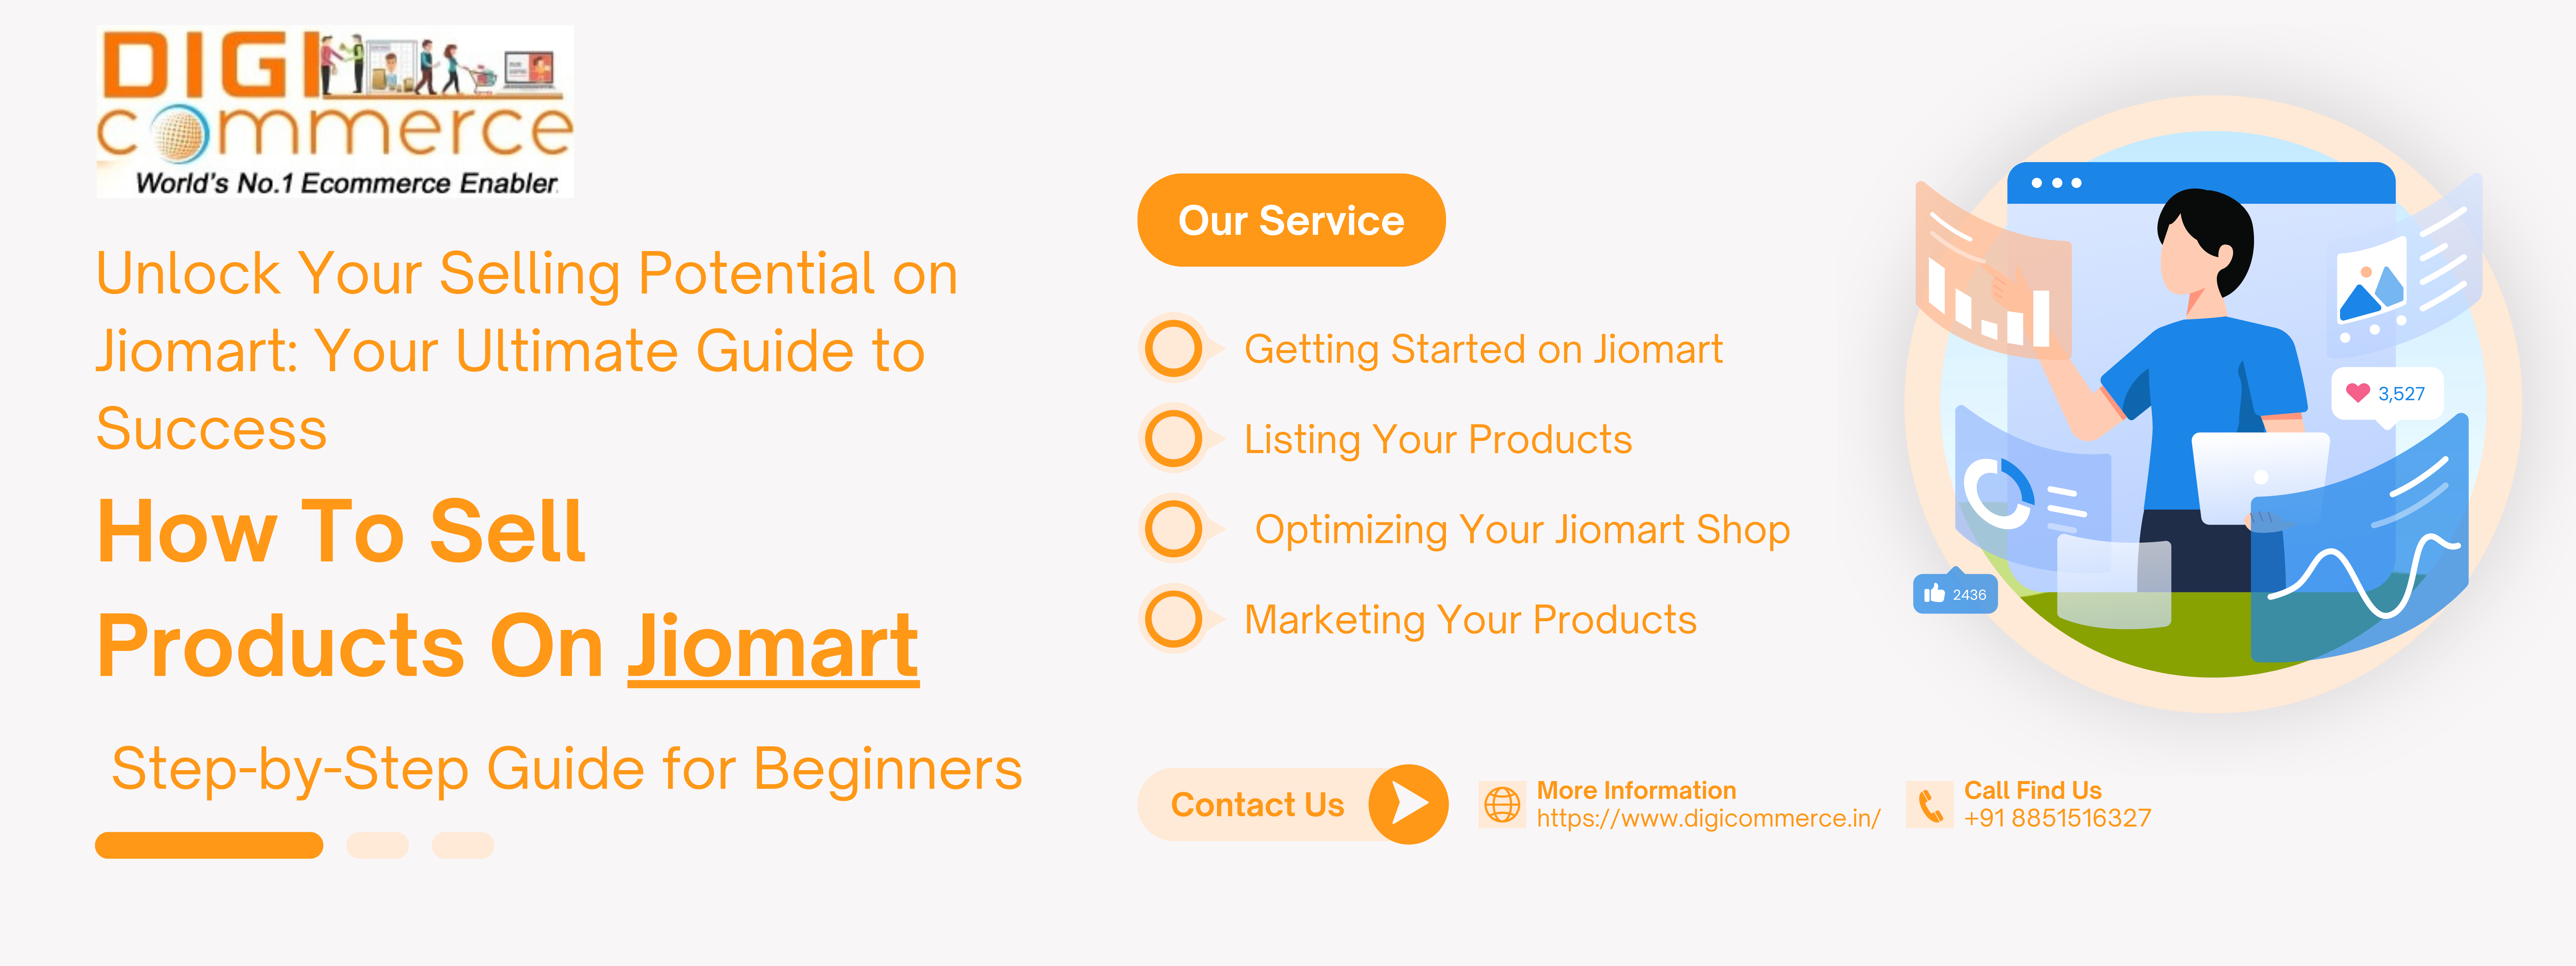 How to Sell Products on Jiomart: A Step-by-Step Guide